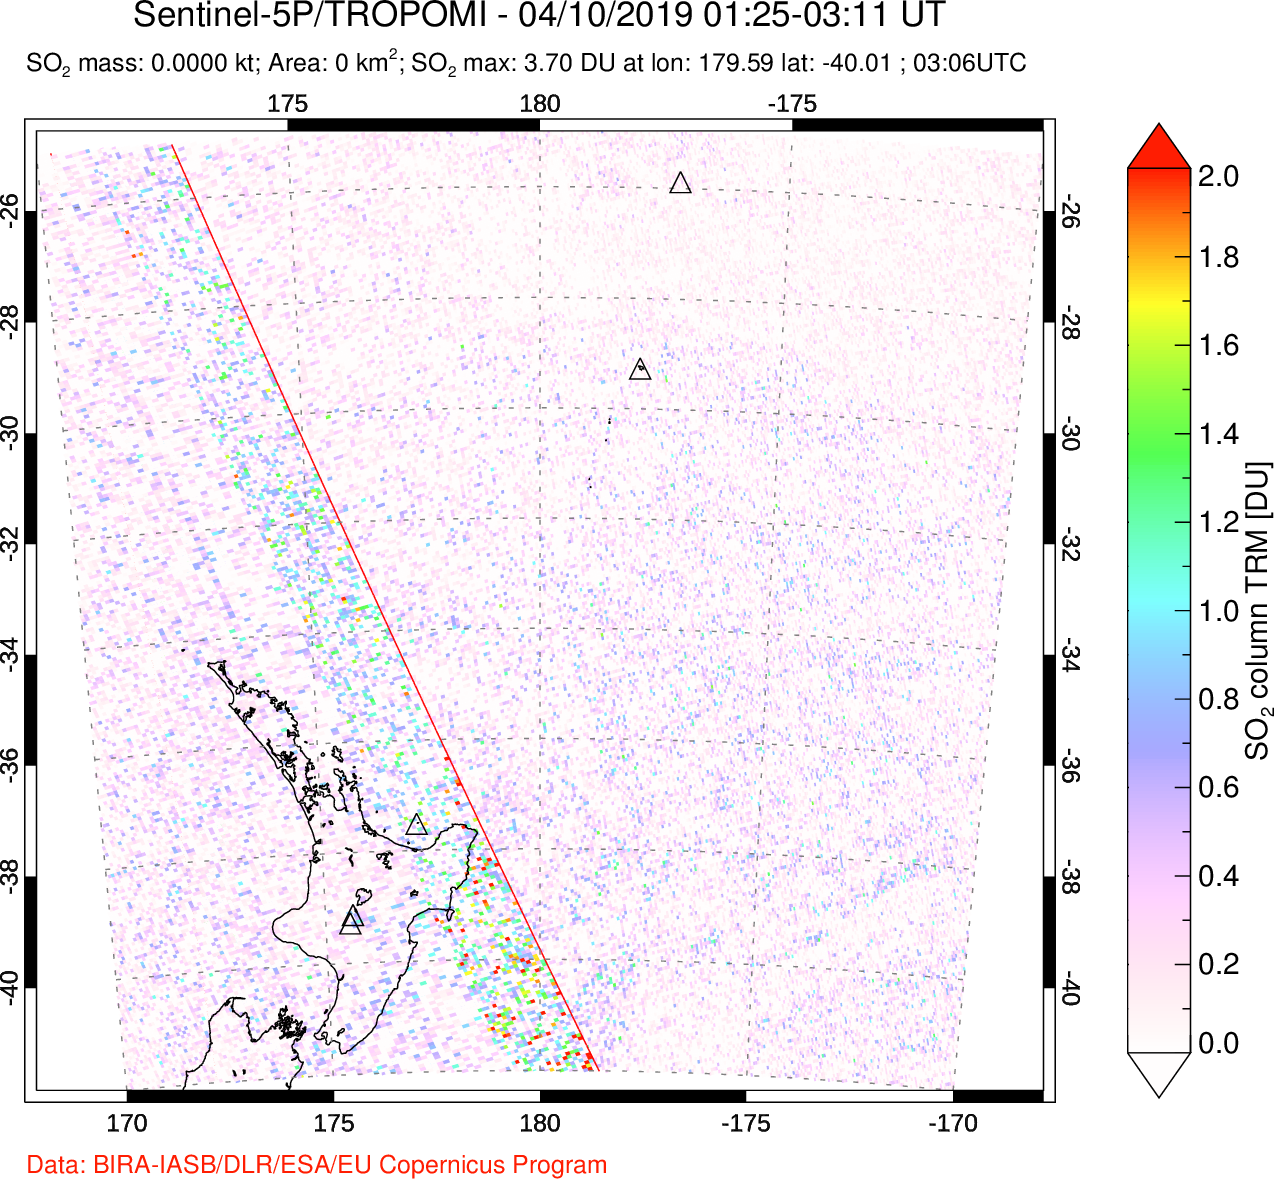 A sulfur dioxide image over New Zealand on Apr 10, 2019.